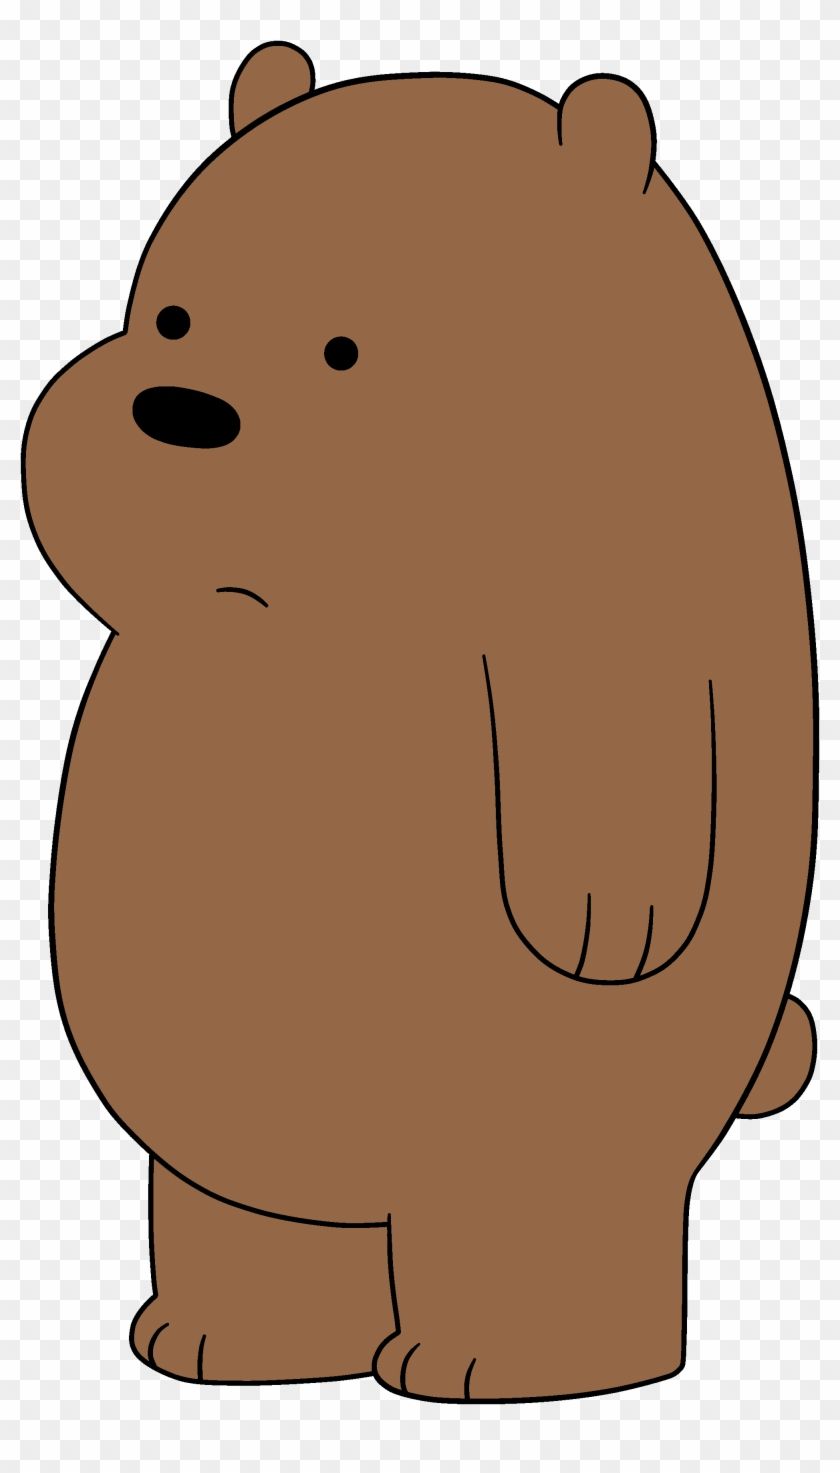 Baby Grizzly Bare Bears Grizzly Baby Transparent PNG Clipart Image Download